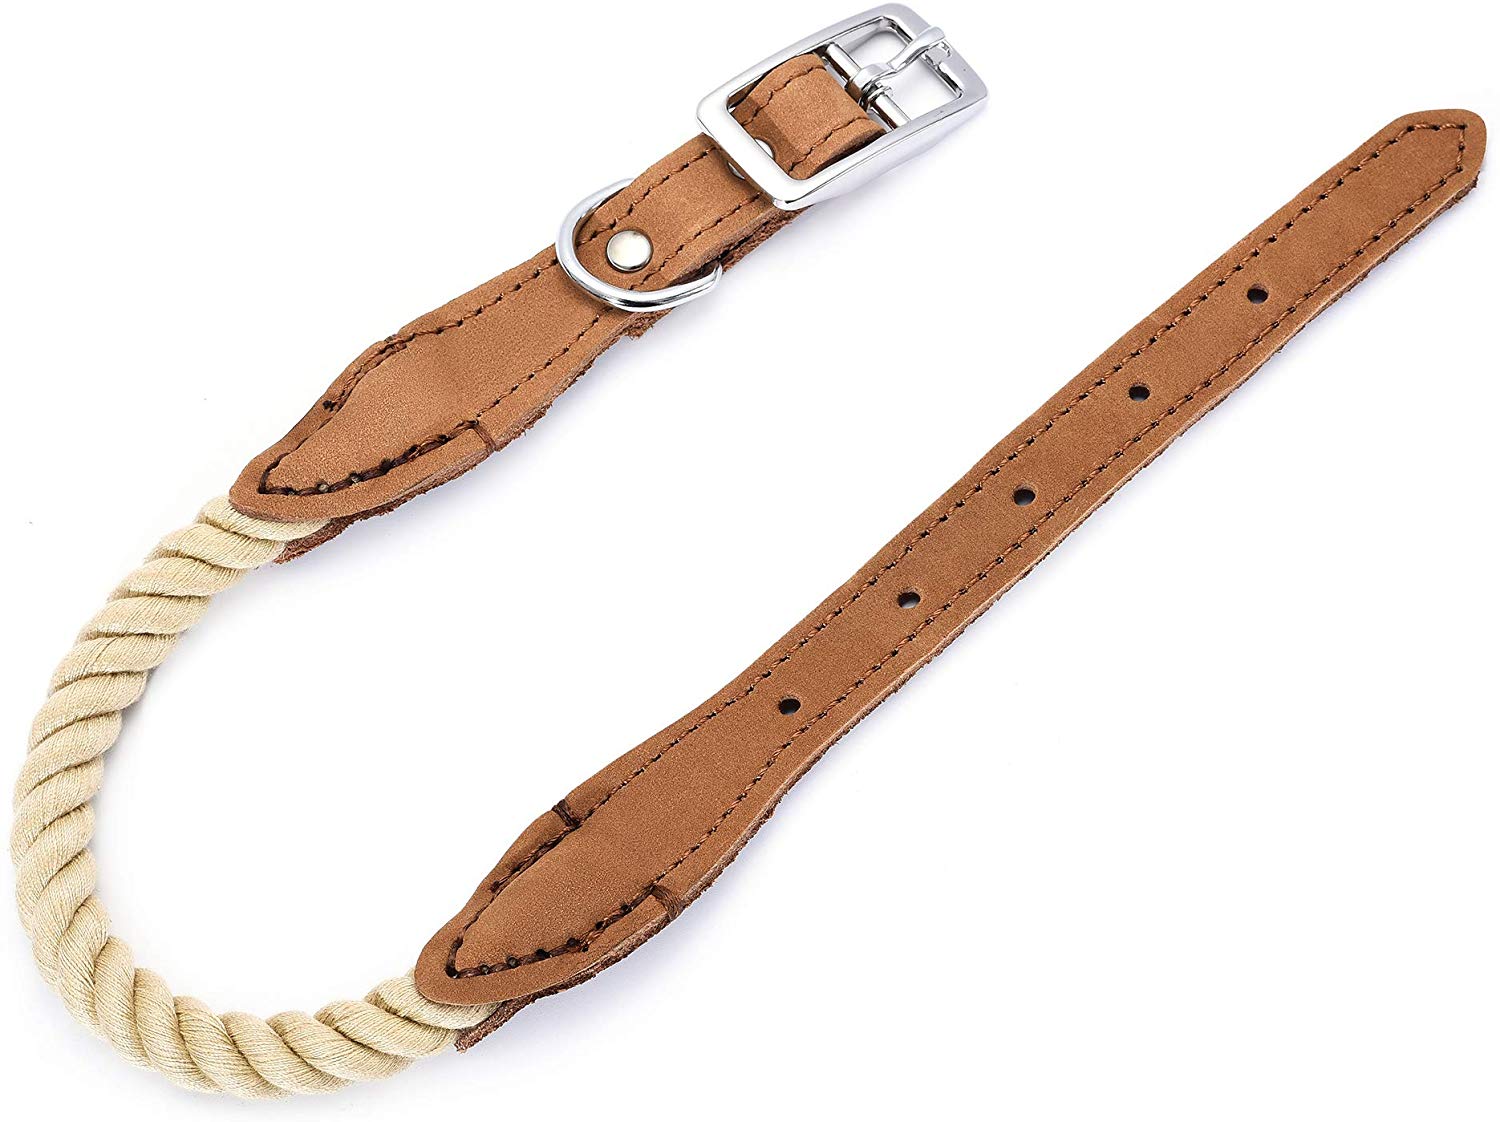 Best Leather Dog Leash and Mountain Dog Leash.